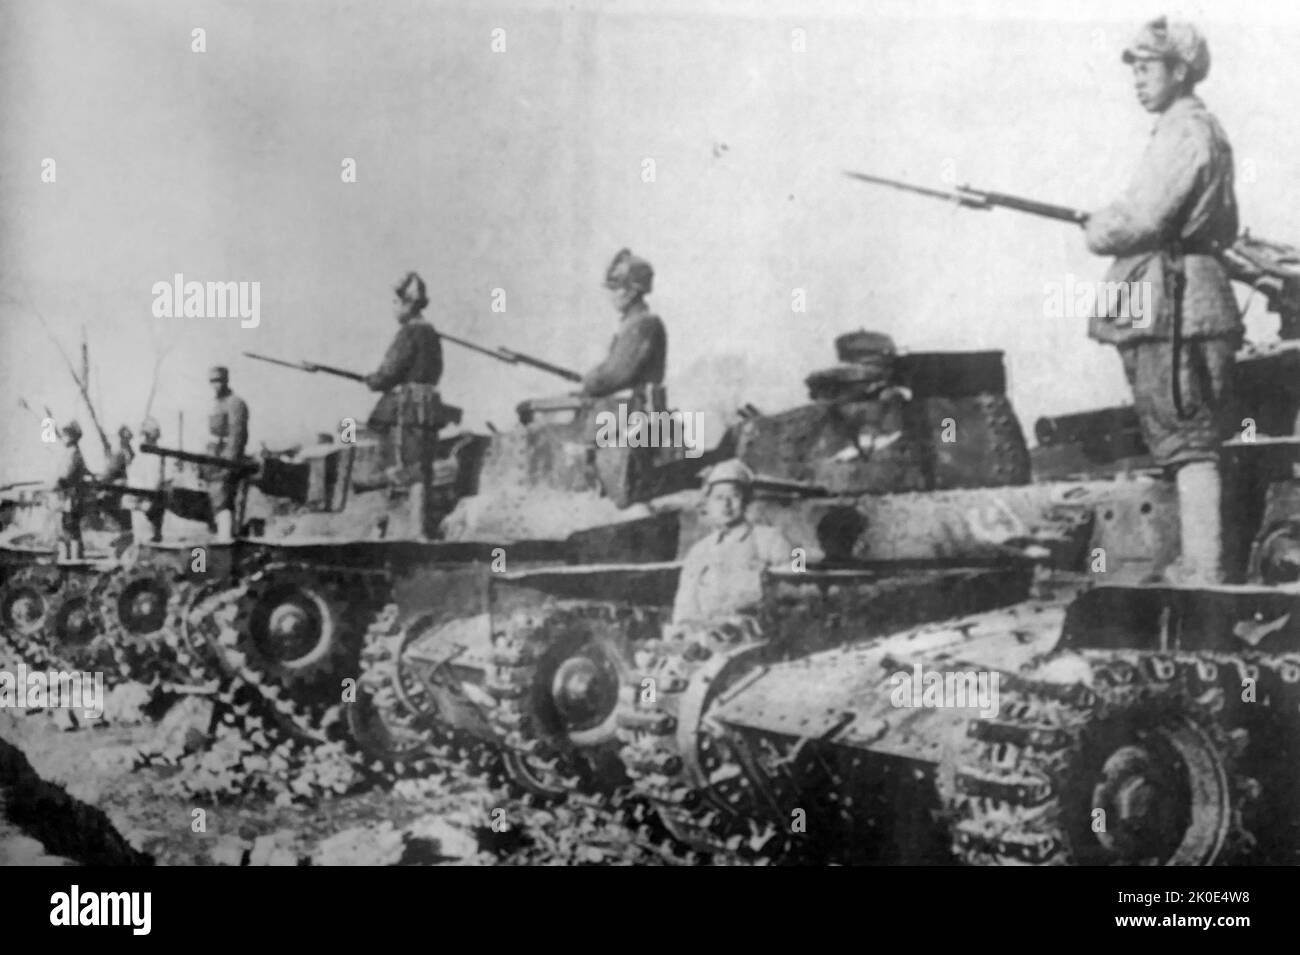 Tanks of the Chinese People's Liberation Army, dicembre 1949. Foto Stock